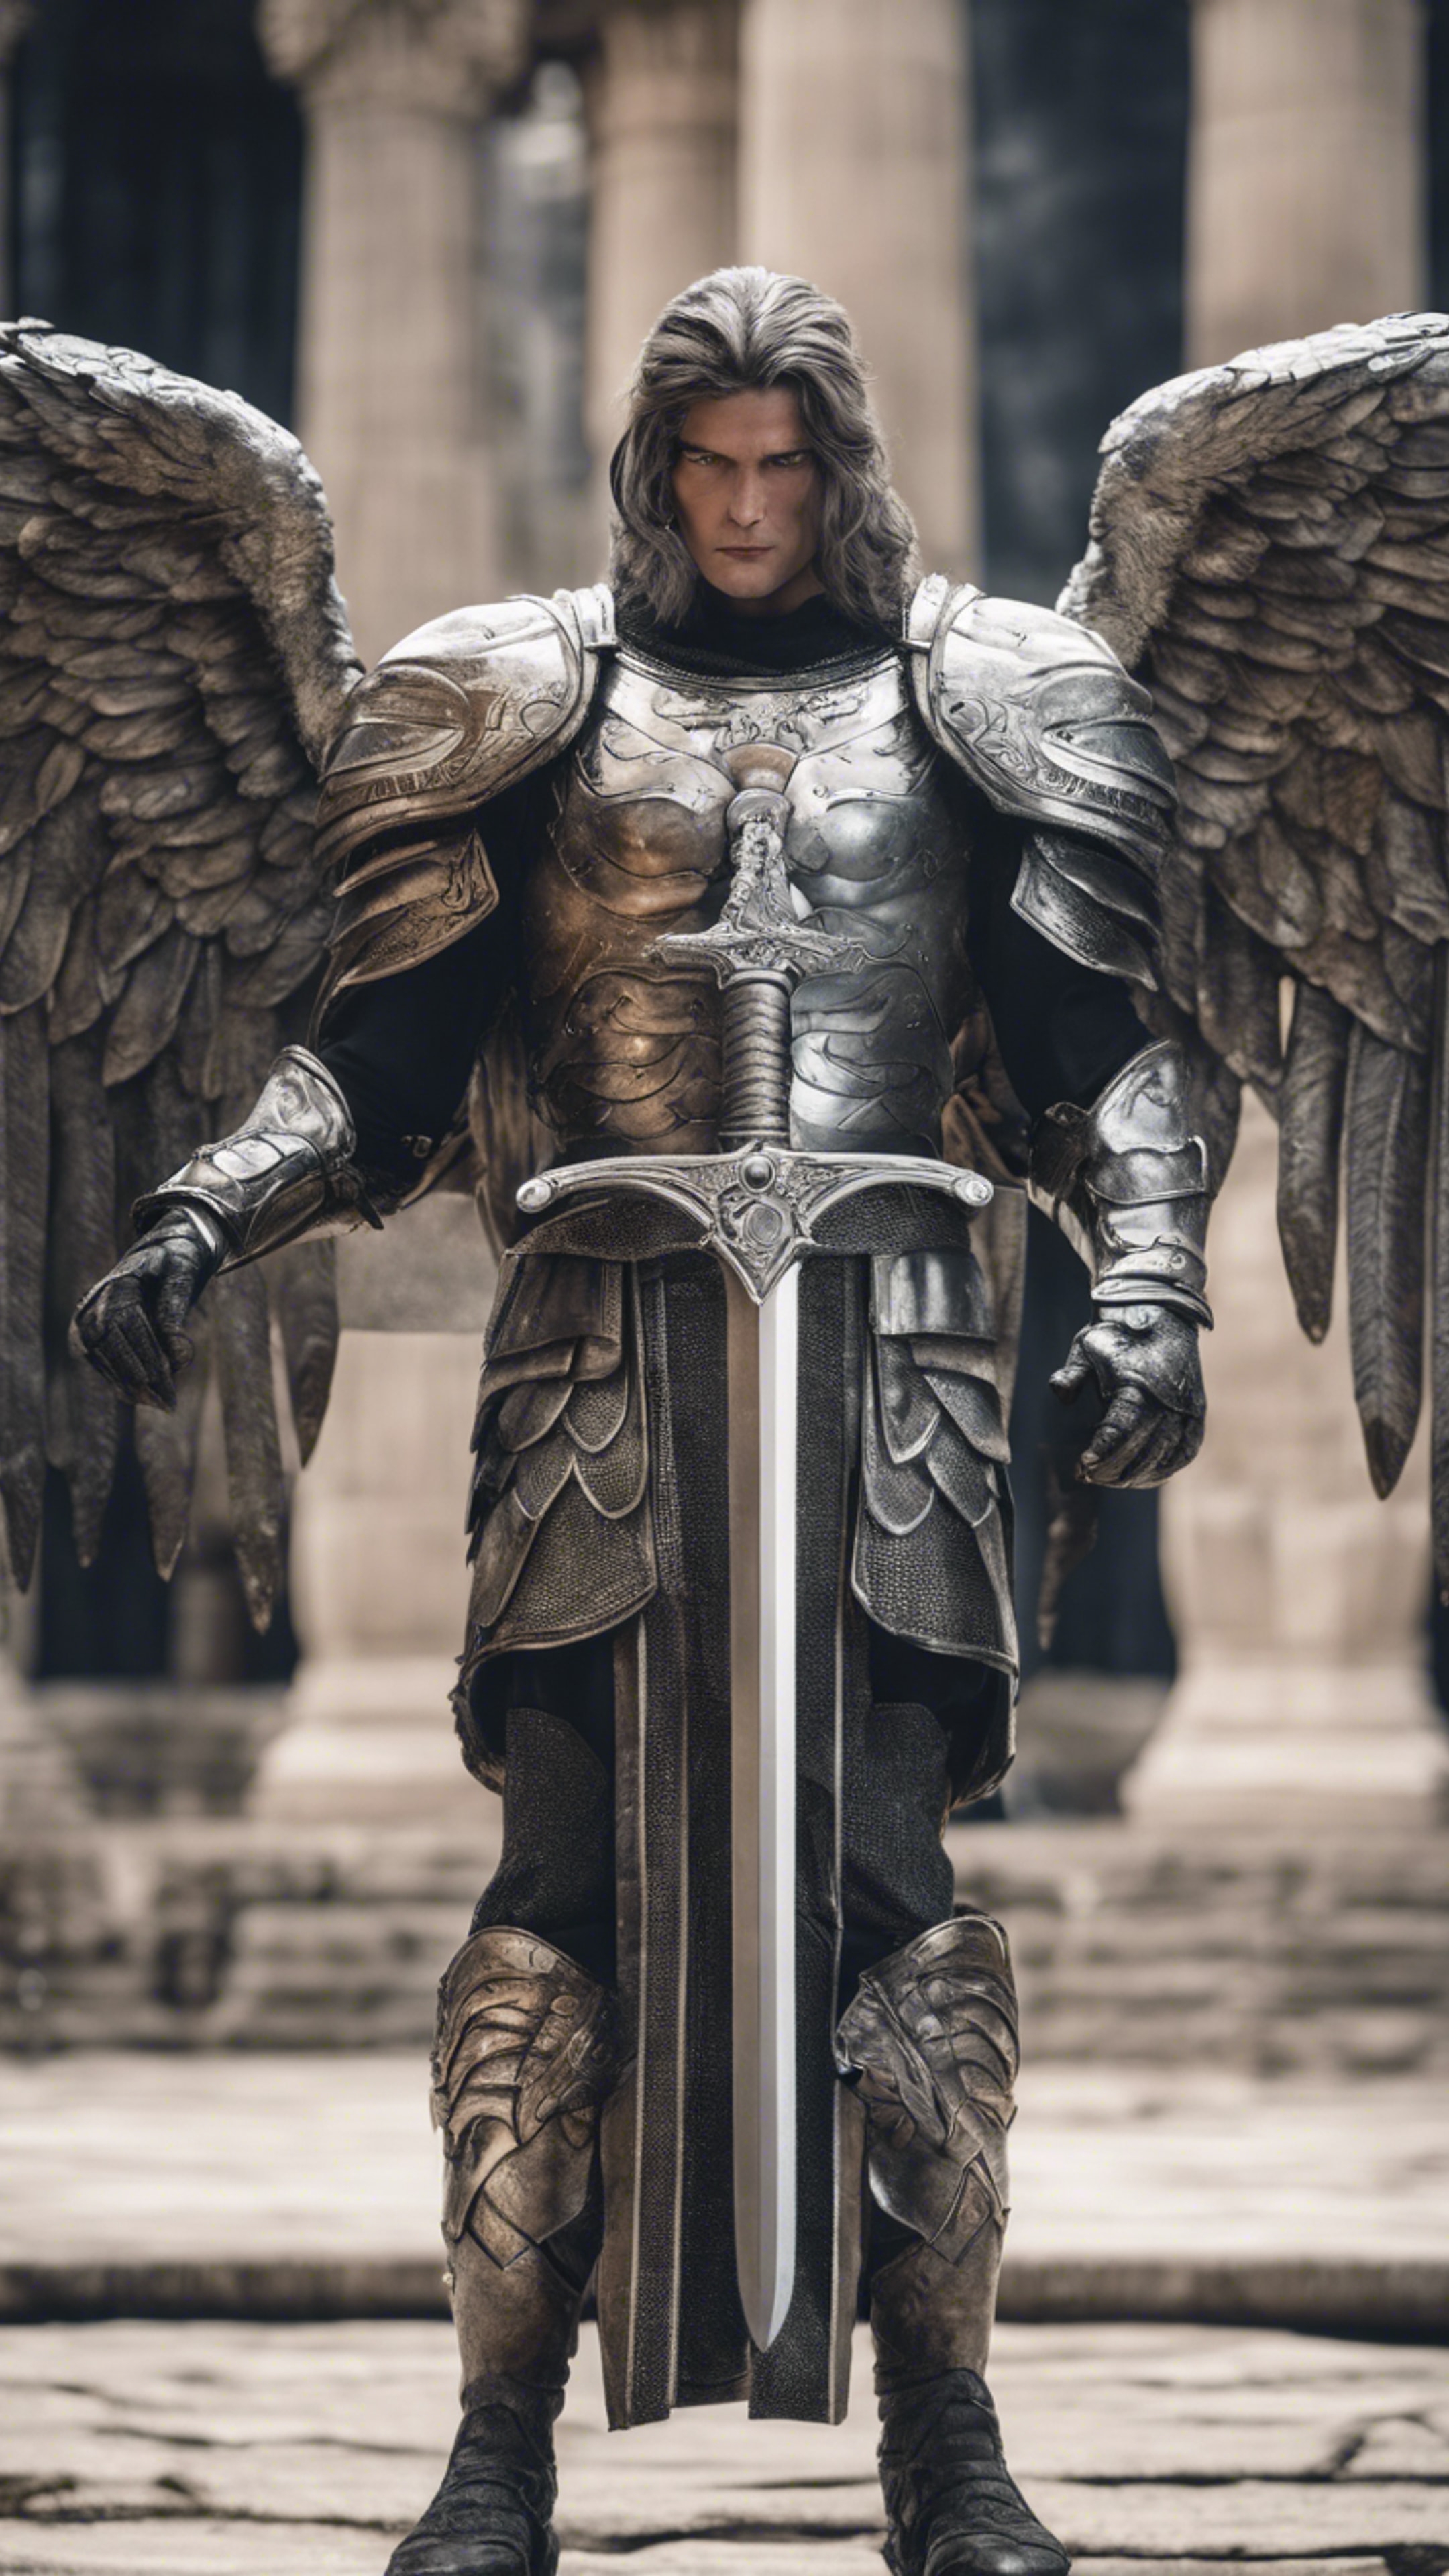 A strong archangel with a great silver sword in battle stance. Behang[1419cc1cb5fd40c69a58]